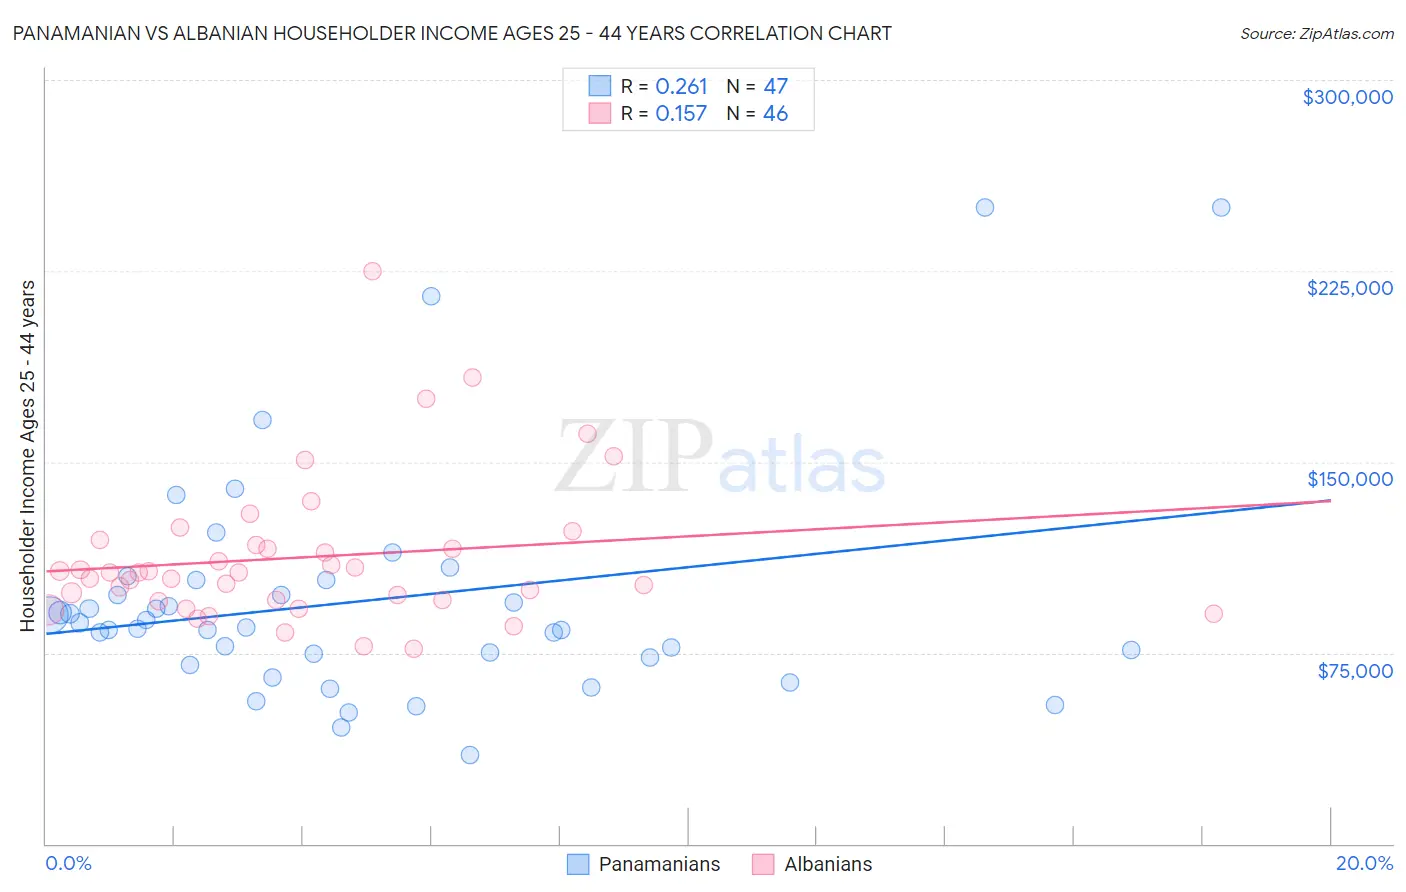 Panamanian vs Albanian Householder Income Ages 25 - 44 years